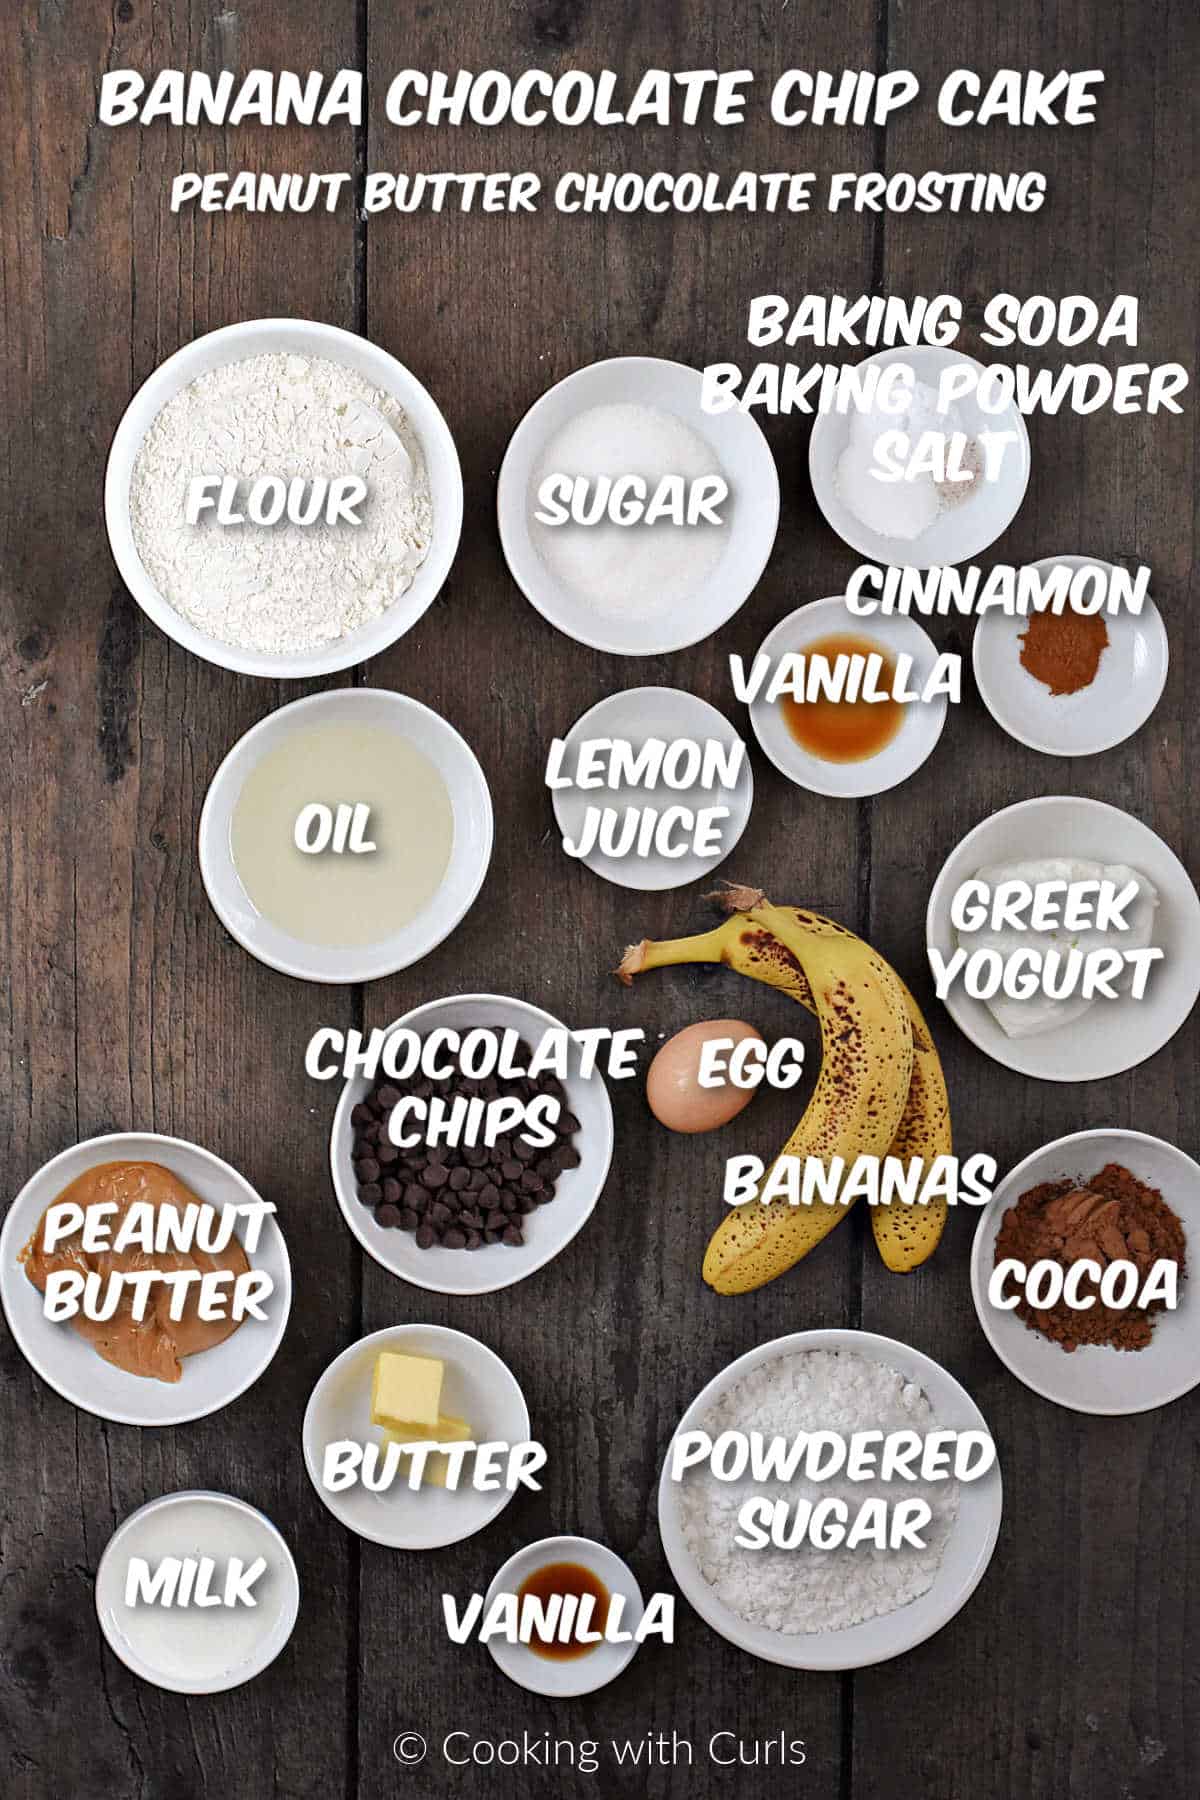 Ingredients needed to make banana chocolate chip cake with peanut butter chocolate frosting.